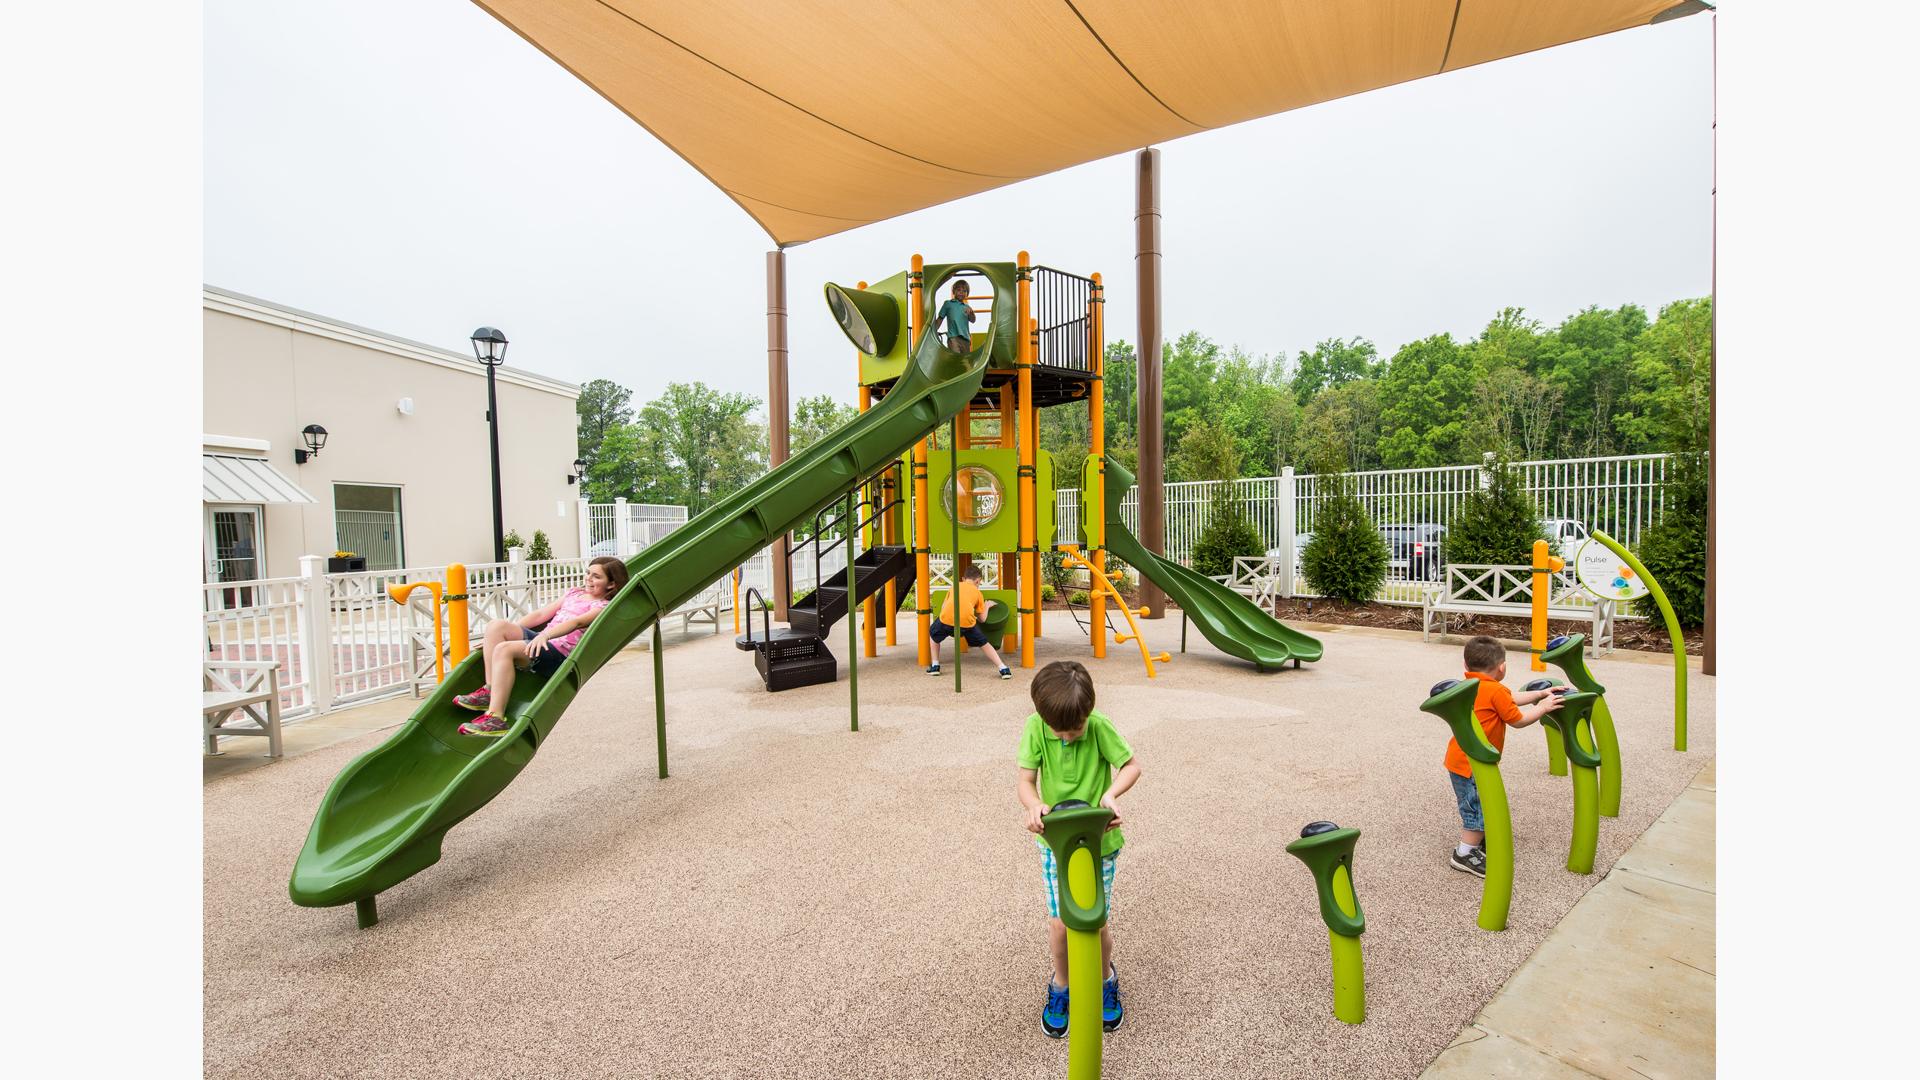 Outlets of Mississippi, Pearl, MS features a PlayOdyssey® Tower along with exciting slide rides and challenging climbers.